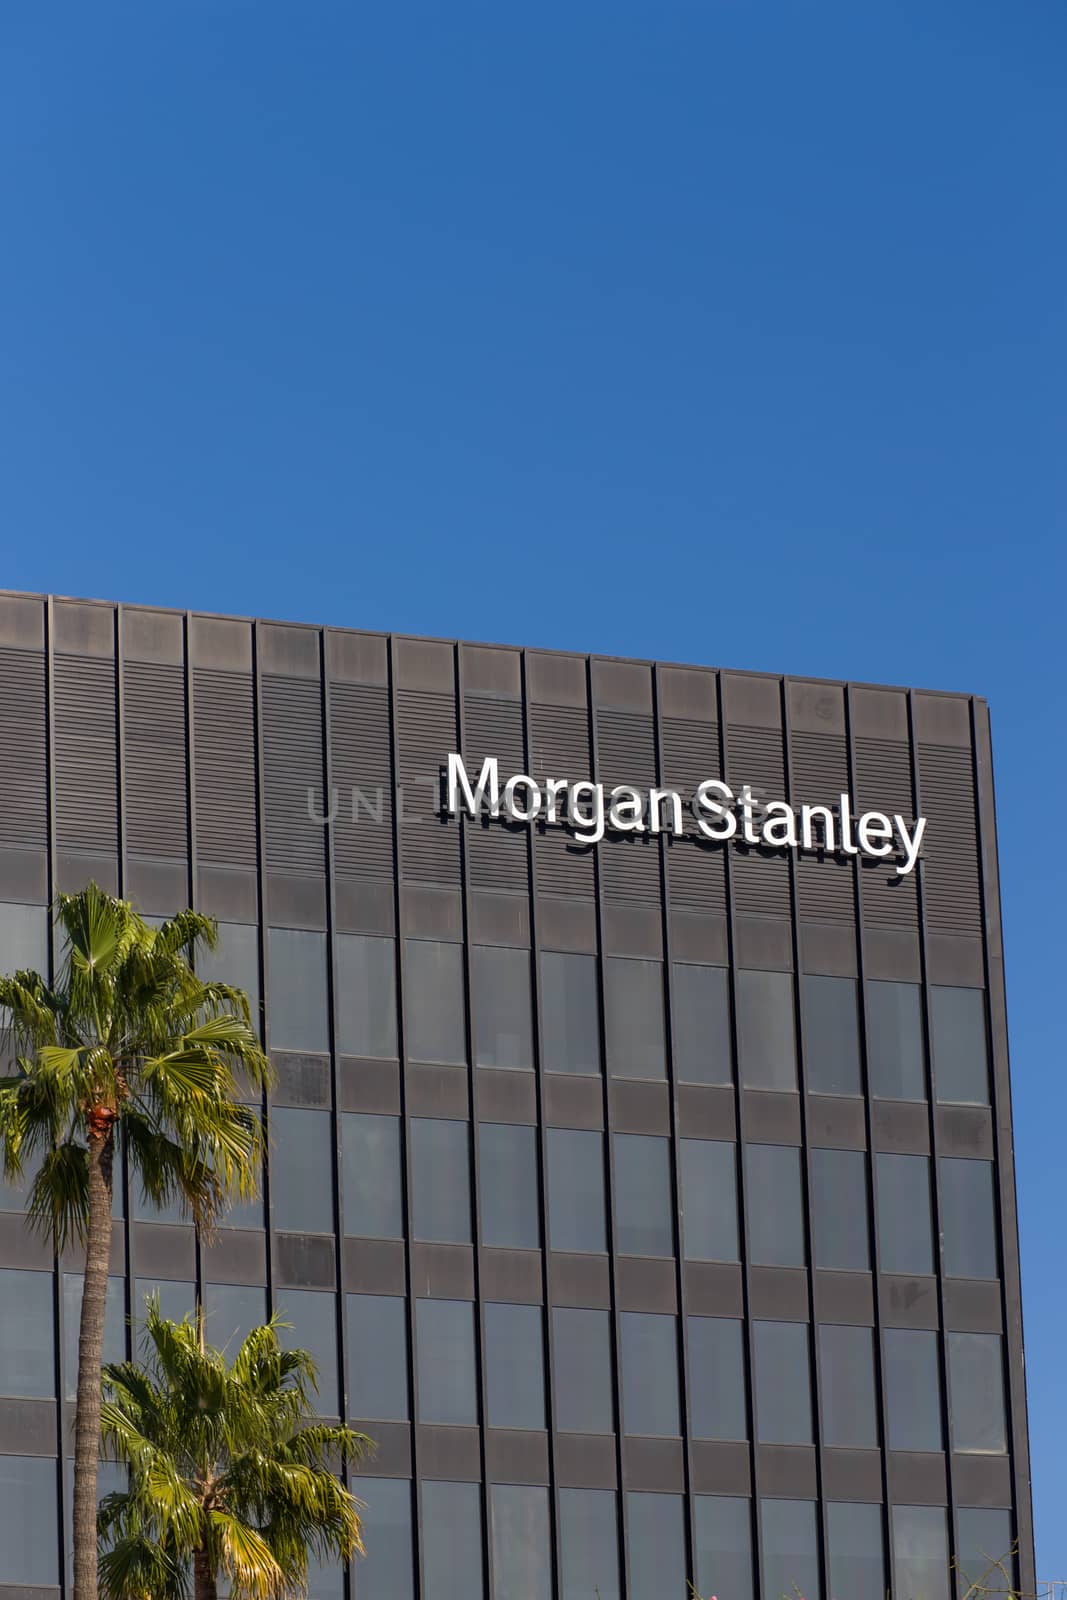 LOS ANGELES, CA/USA - NOVEMBER 11, 2015: Morgan Stanely building and logo. Morgan Stanley is an American multinational financial services corporation.